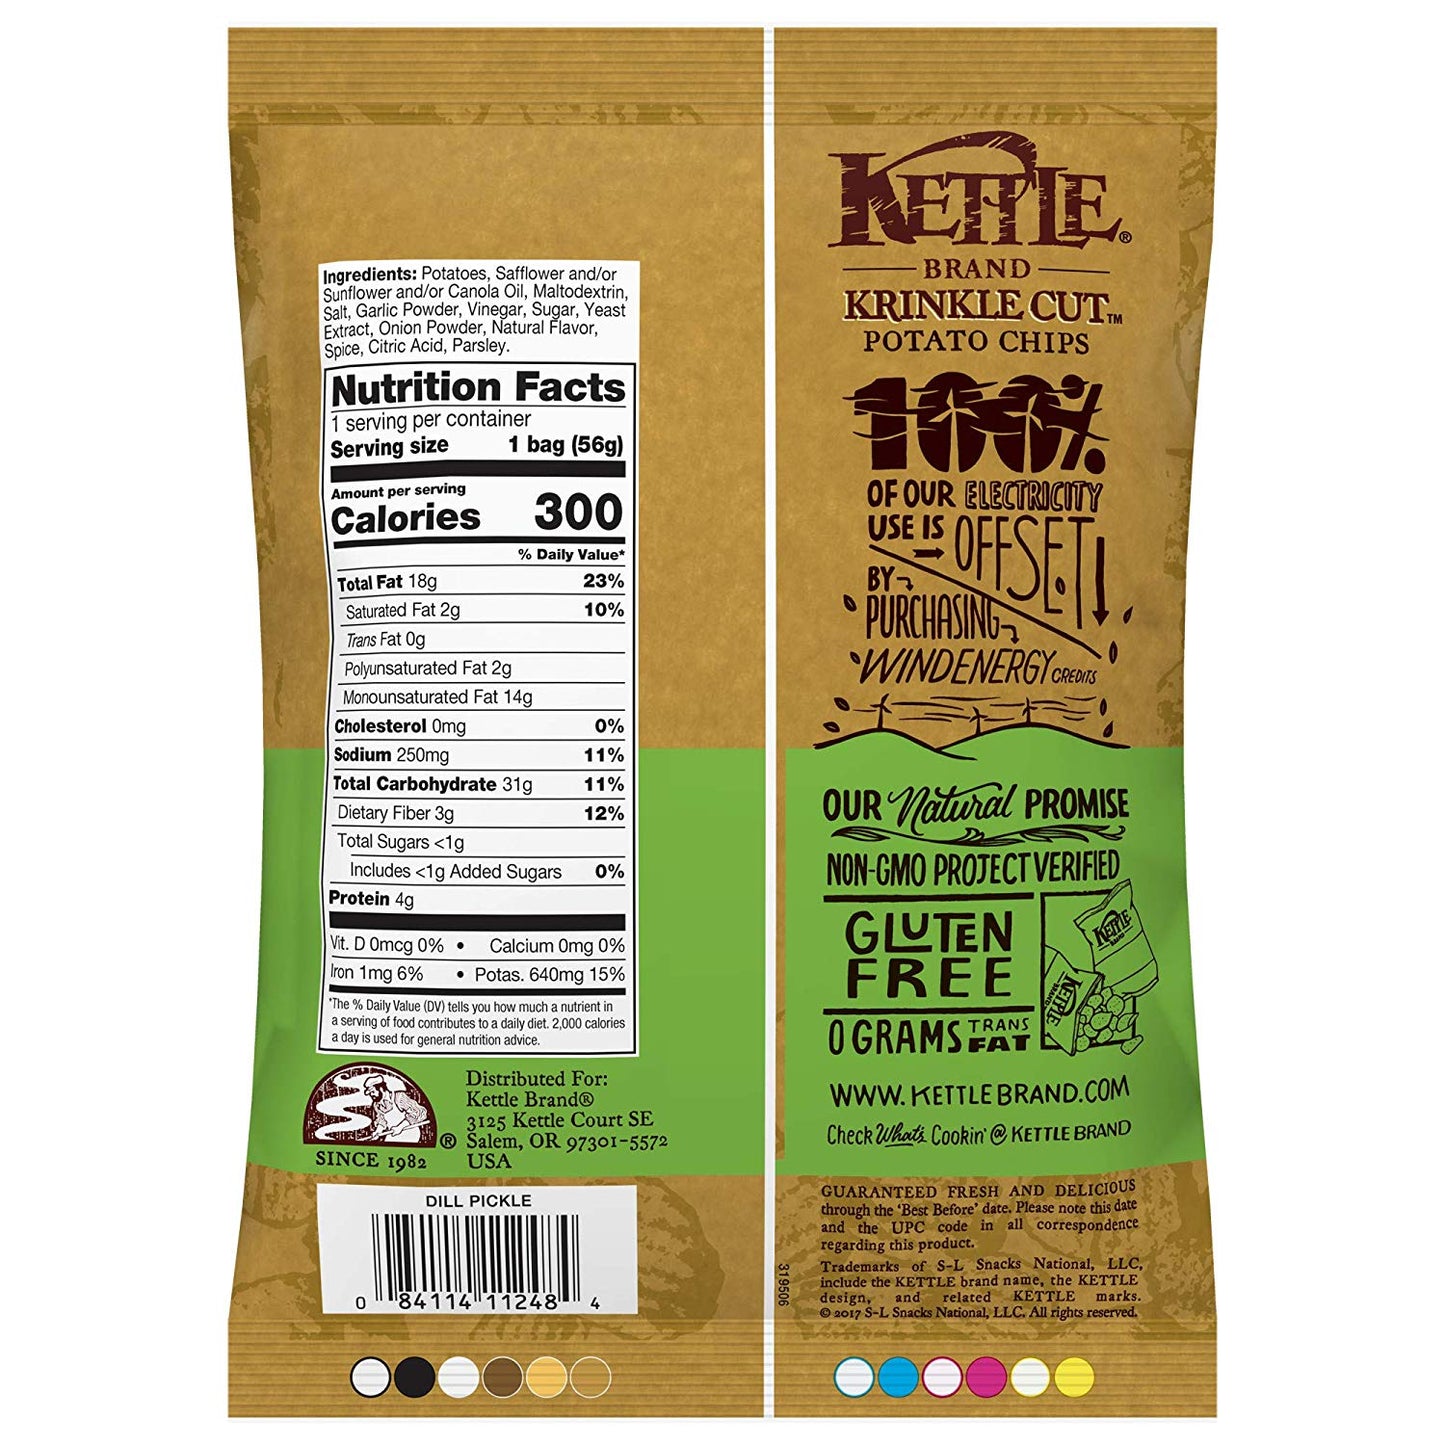 Kettle Brand Potato Chips, Krinkle Cut Dill Pickle, 2 Ounce (Pack of 6)